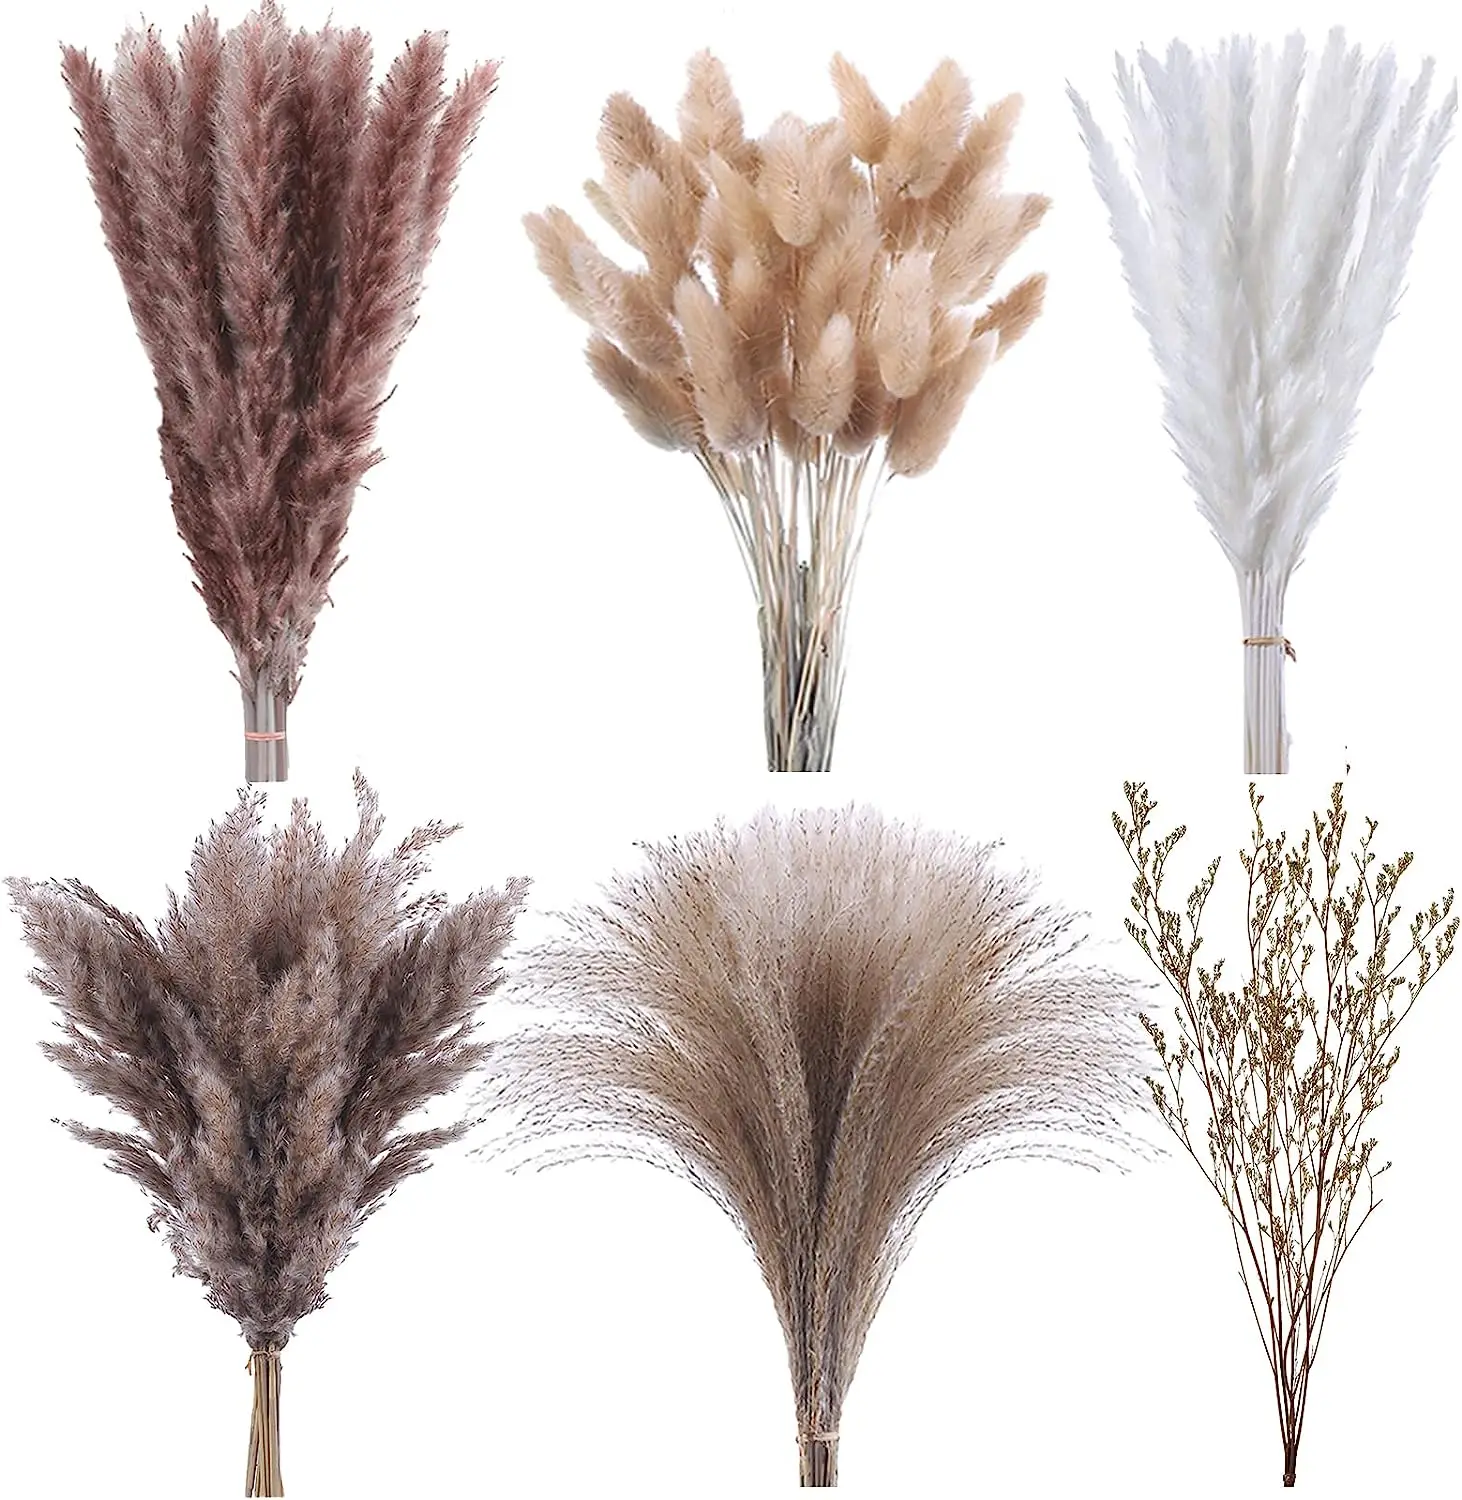 30 Natural Black Pampas Grass Stems 17 Inch Dried Fluffy Small